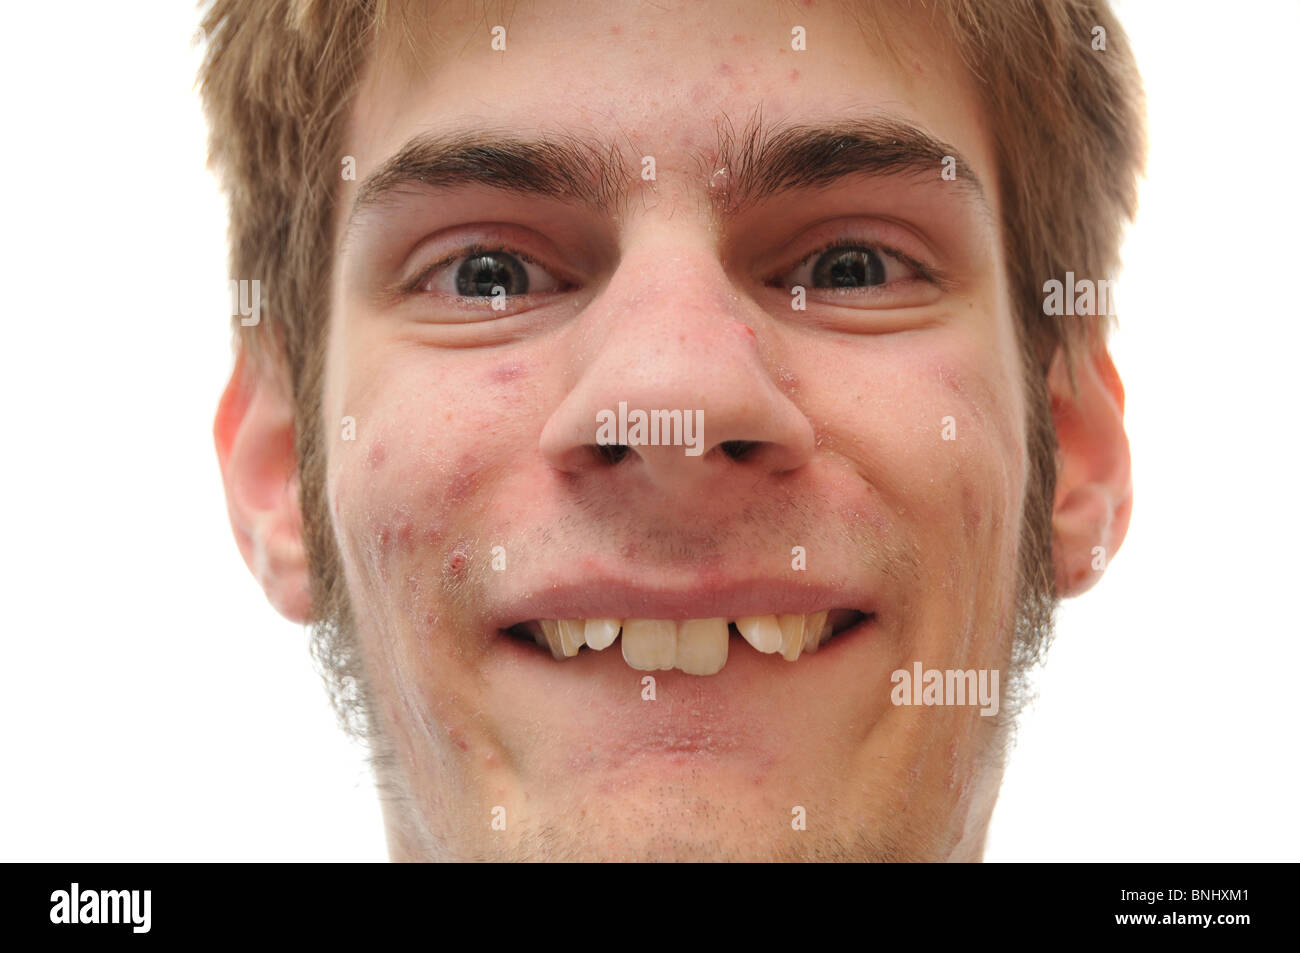 Weird white Caucasian facial expression smiling isolated on white background. Crooked teeth, he needs braces Stock Photo